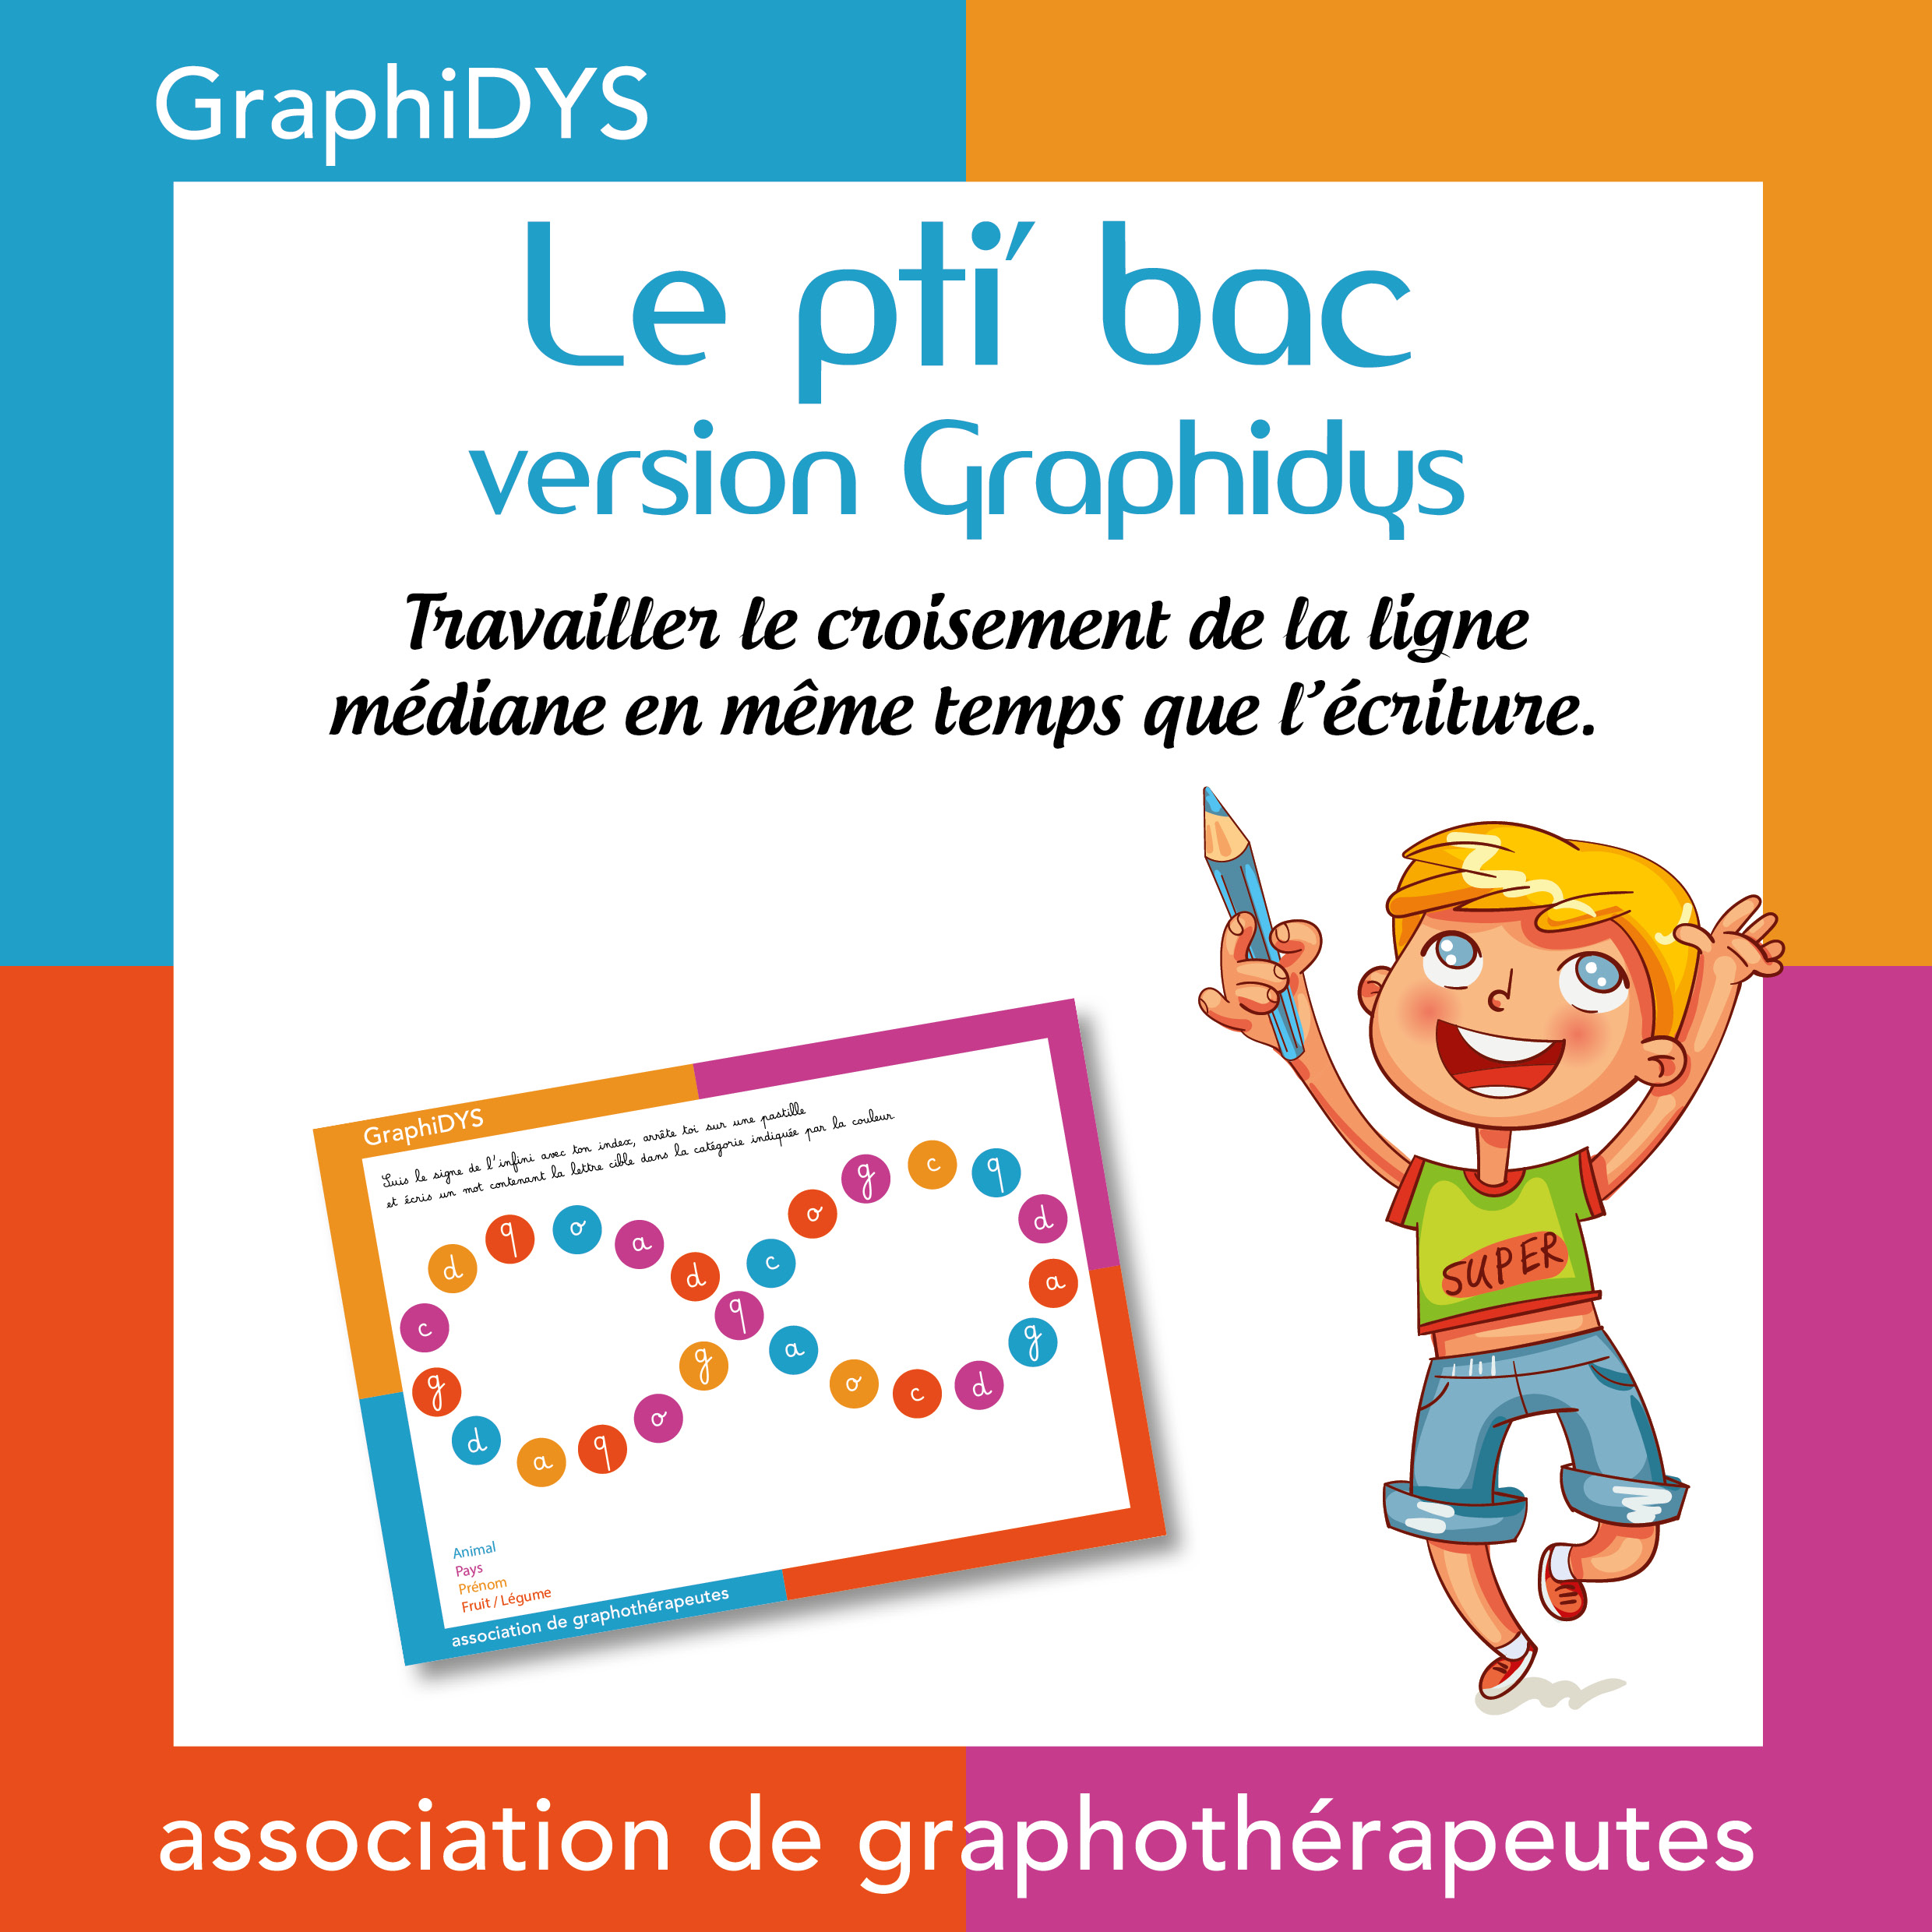 Image Carousel Graphidys Le Pti'Bac version Graphidys